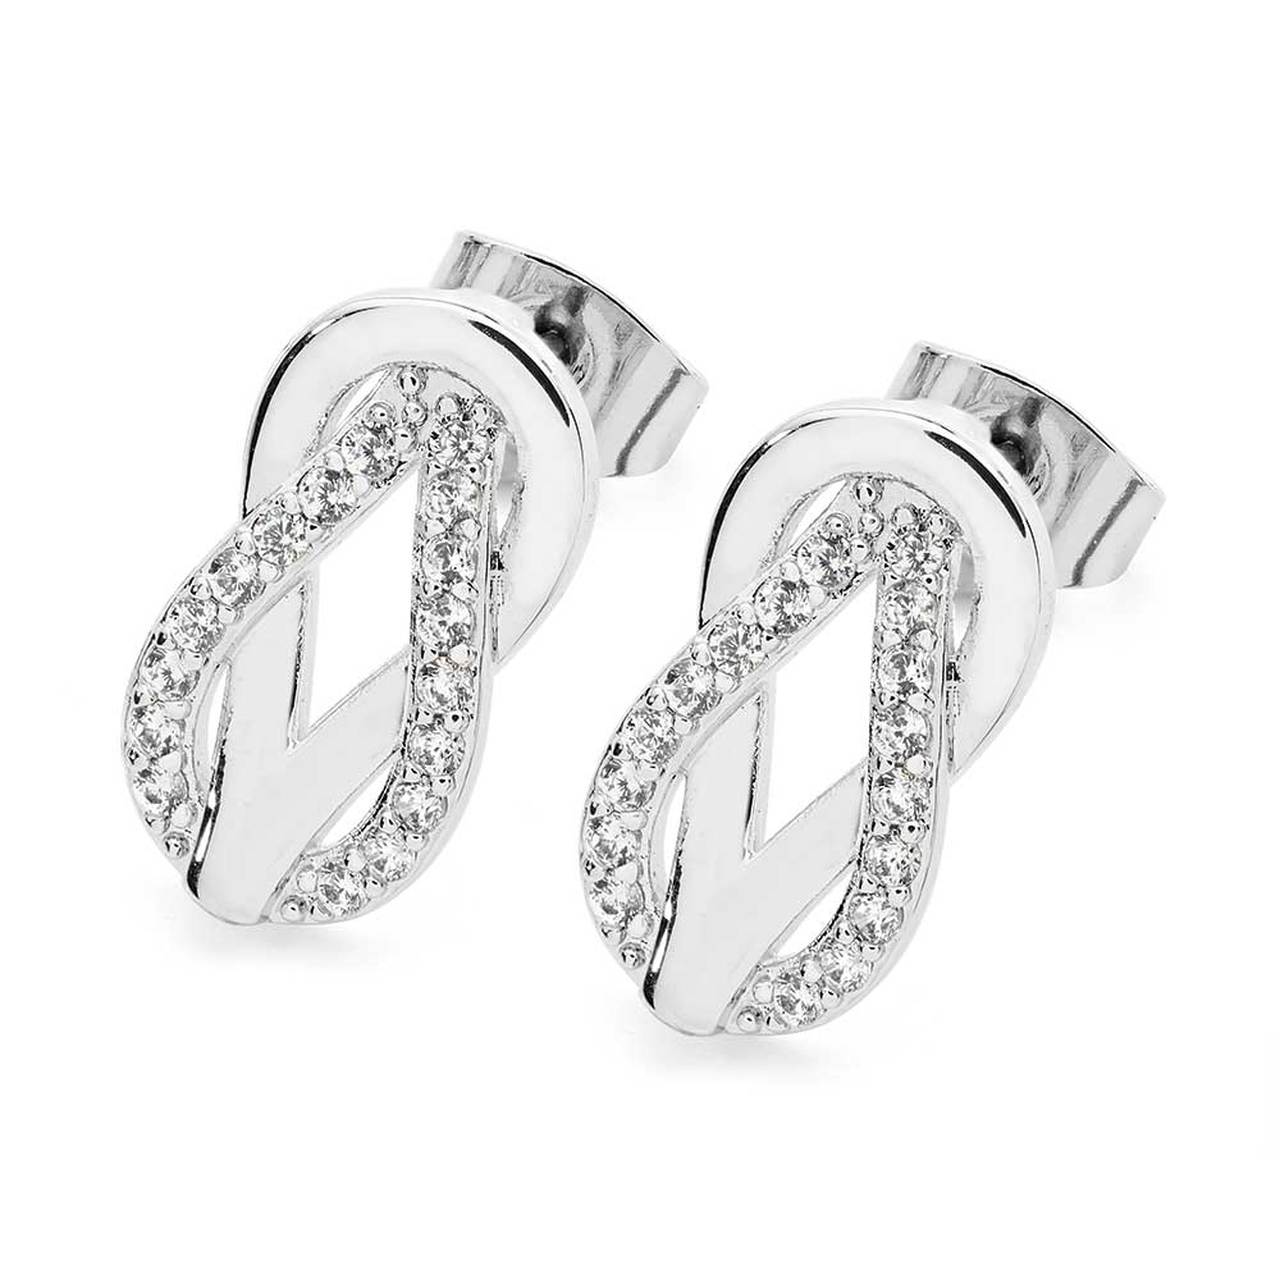 Tipperary Crystal Silver Double Swirl Earrings  Expertly crafted in sleek silver, these inﬁnity inspired earrings are a very dimensional look featuring two sleek linking tear-drop shaped elements. Two interlocking loops, one sleekly polished, and the other completely lined with clear crystal accents are joined harmoniously in an everlasting embrace. These unique eye catching post earrings captivate with their sparkle and brightly polished shine. They secure comfortably with push backs.